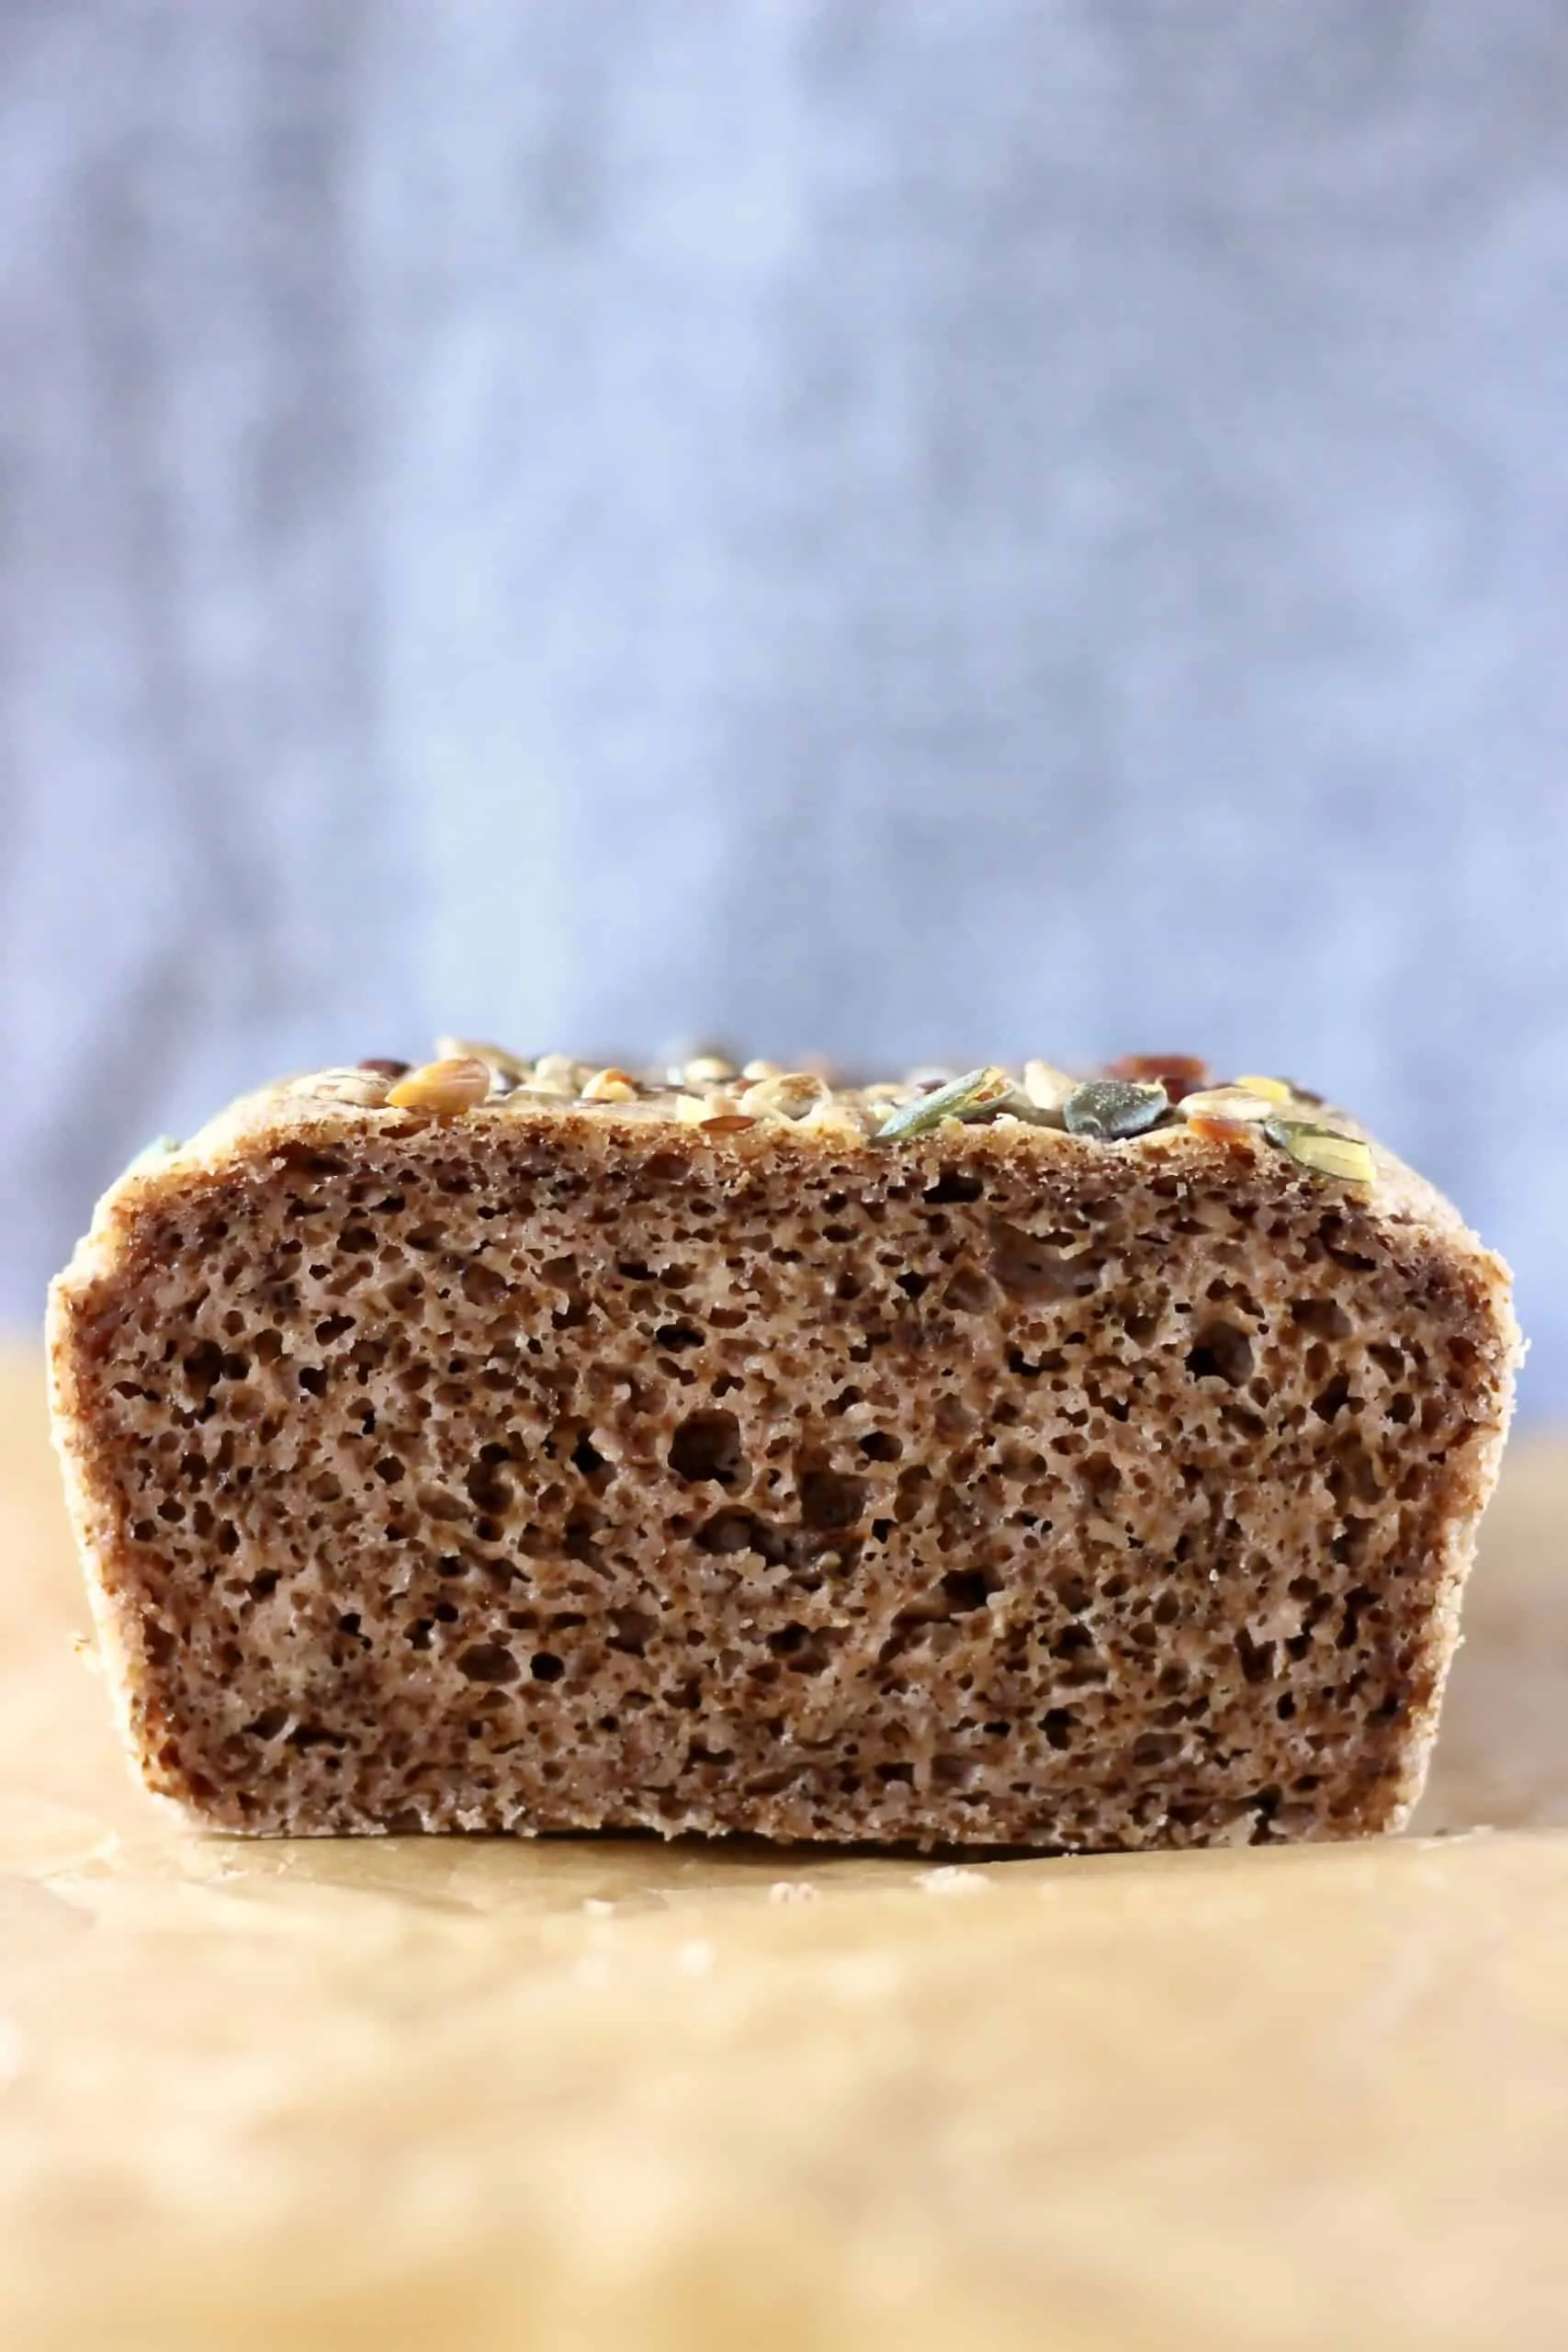 A sliced loaf of walnut bread on a sheet of brown baking paper against a grey background